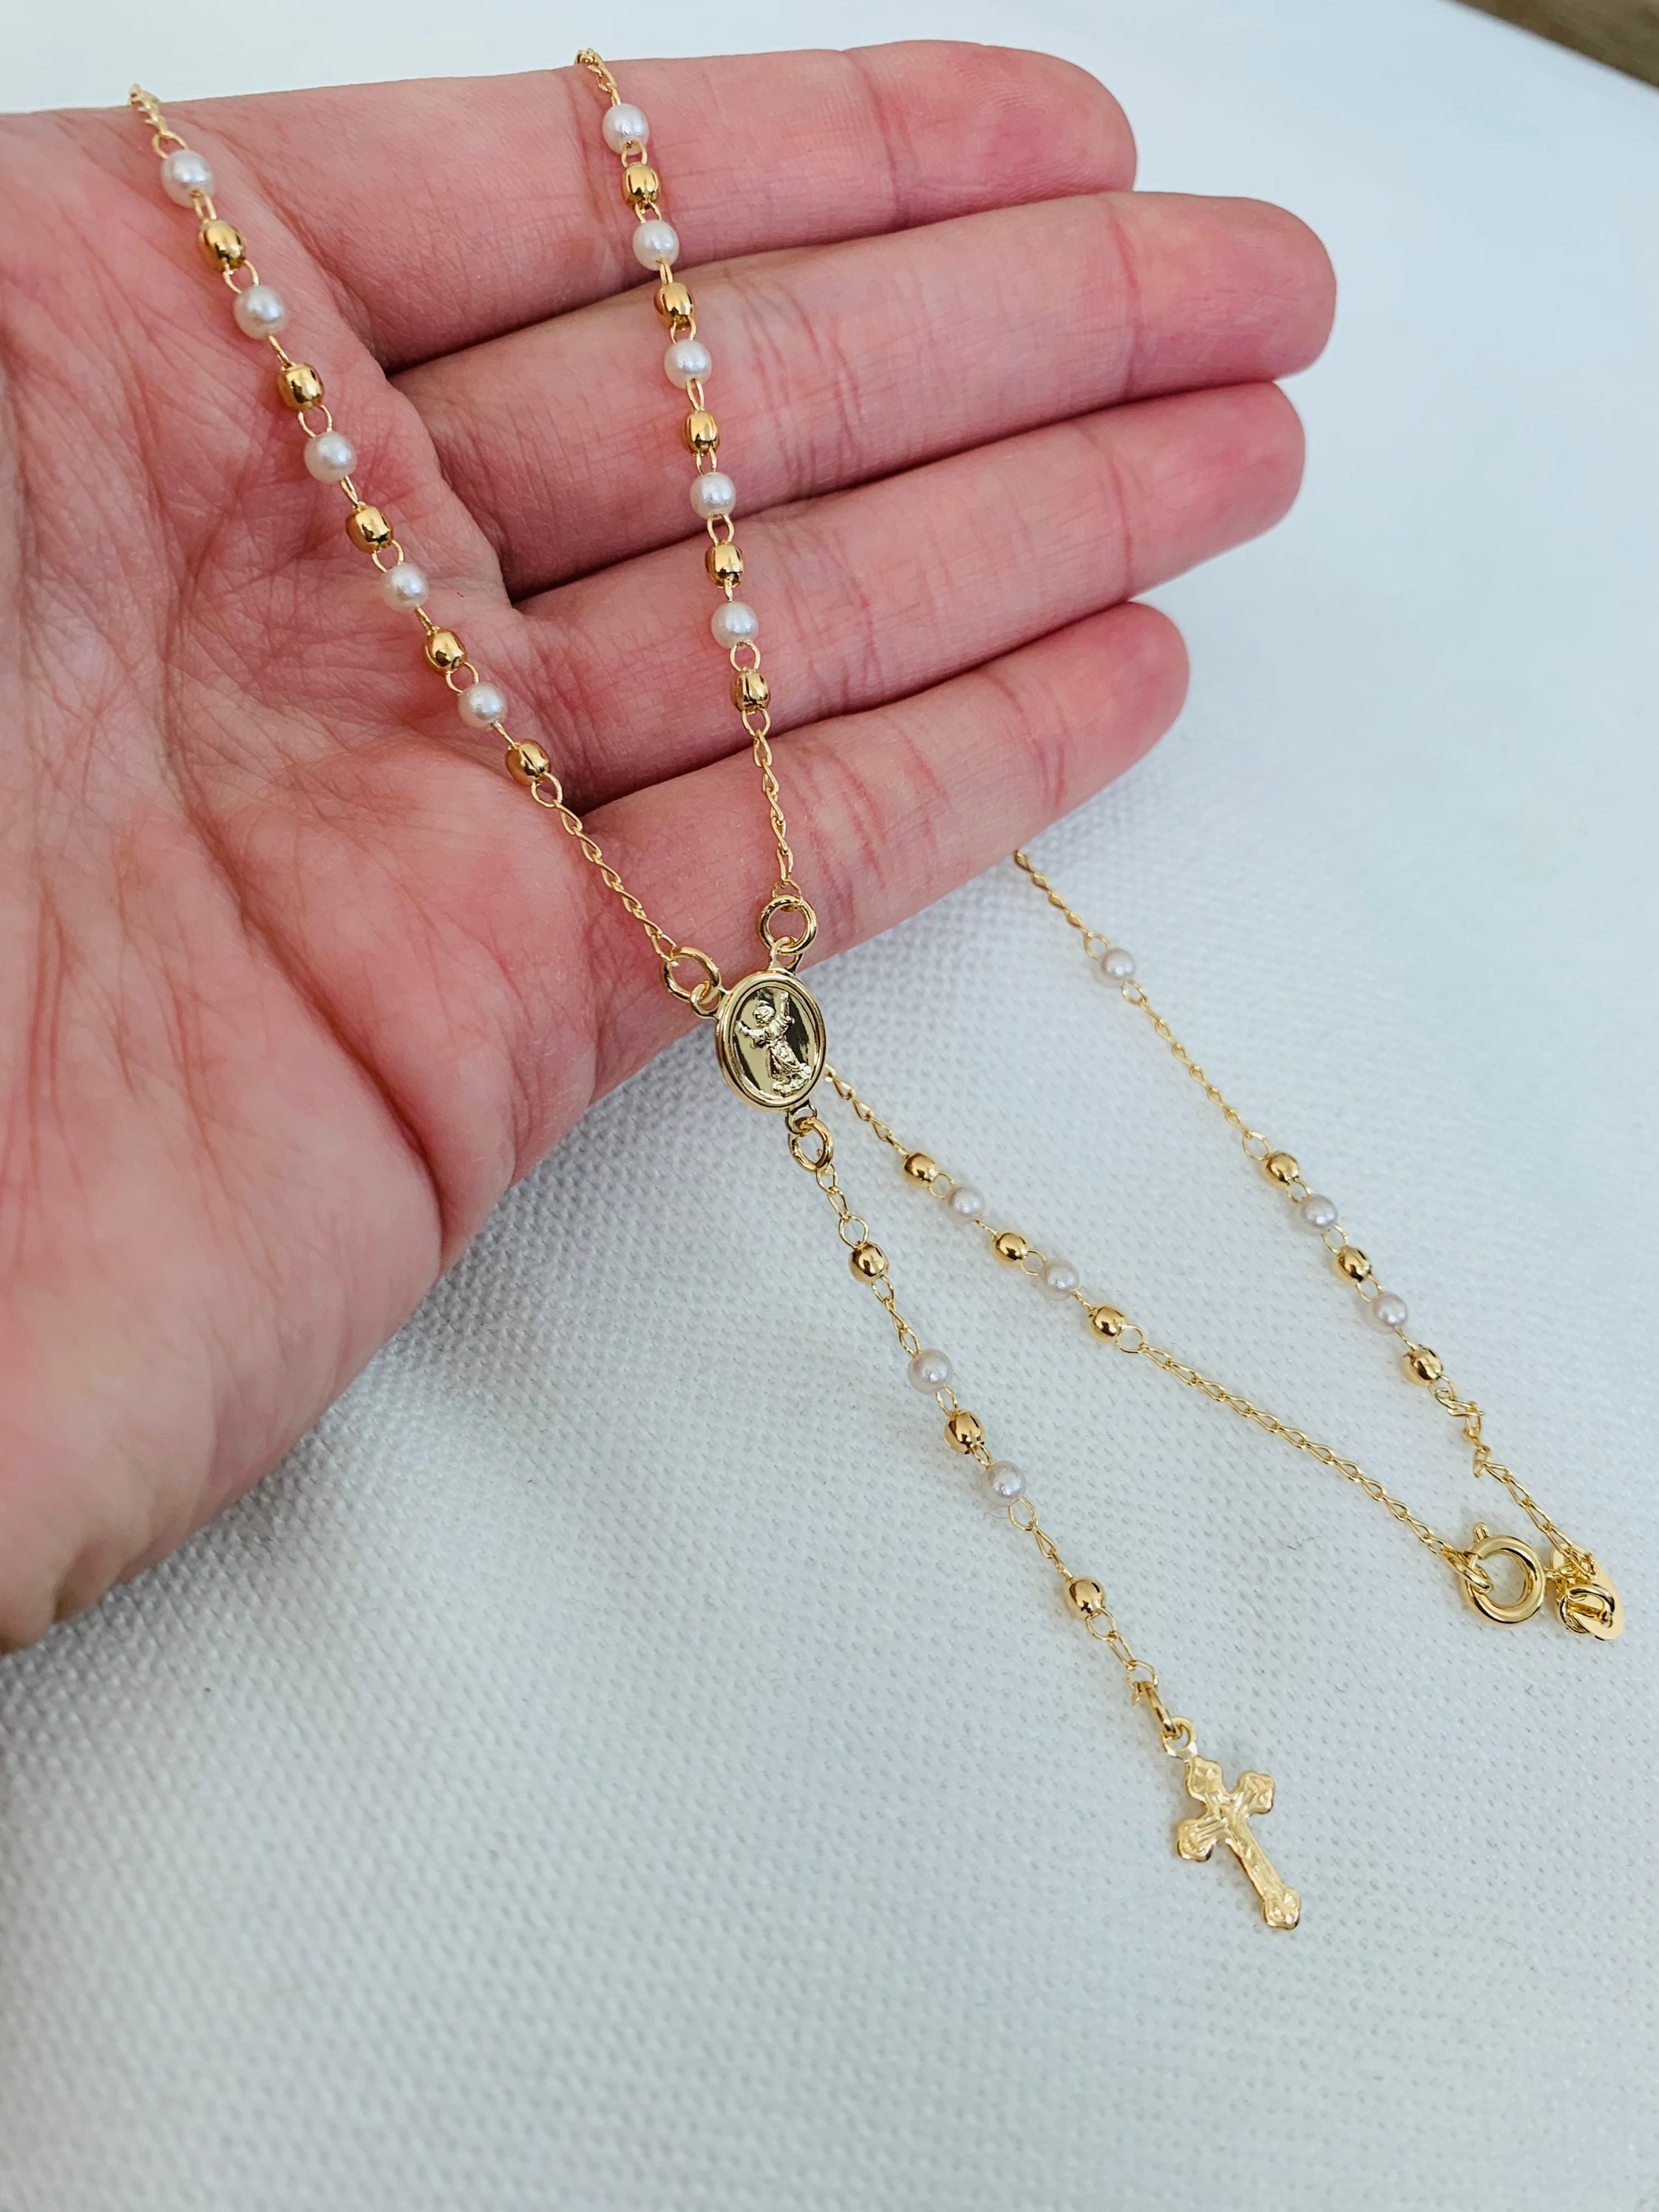 Buy Pearl Rosary Beads, Gold Rosary, Catholic Rosary, Pearl Prayer Beads,  Confirmation Gift, Christian Jewelry, Wedding Jewelry Online in India - Etsy